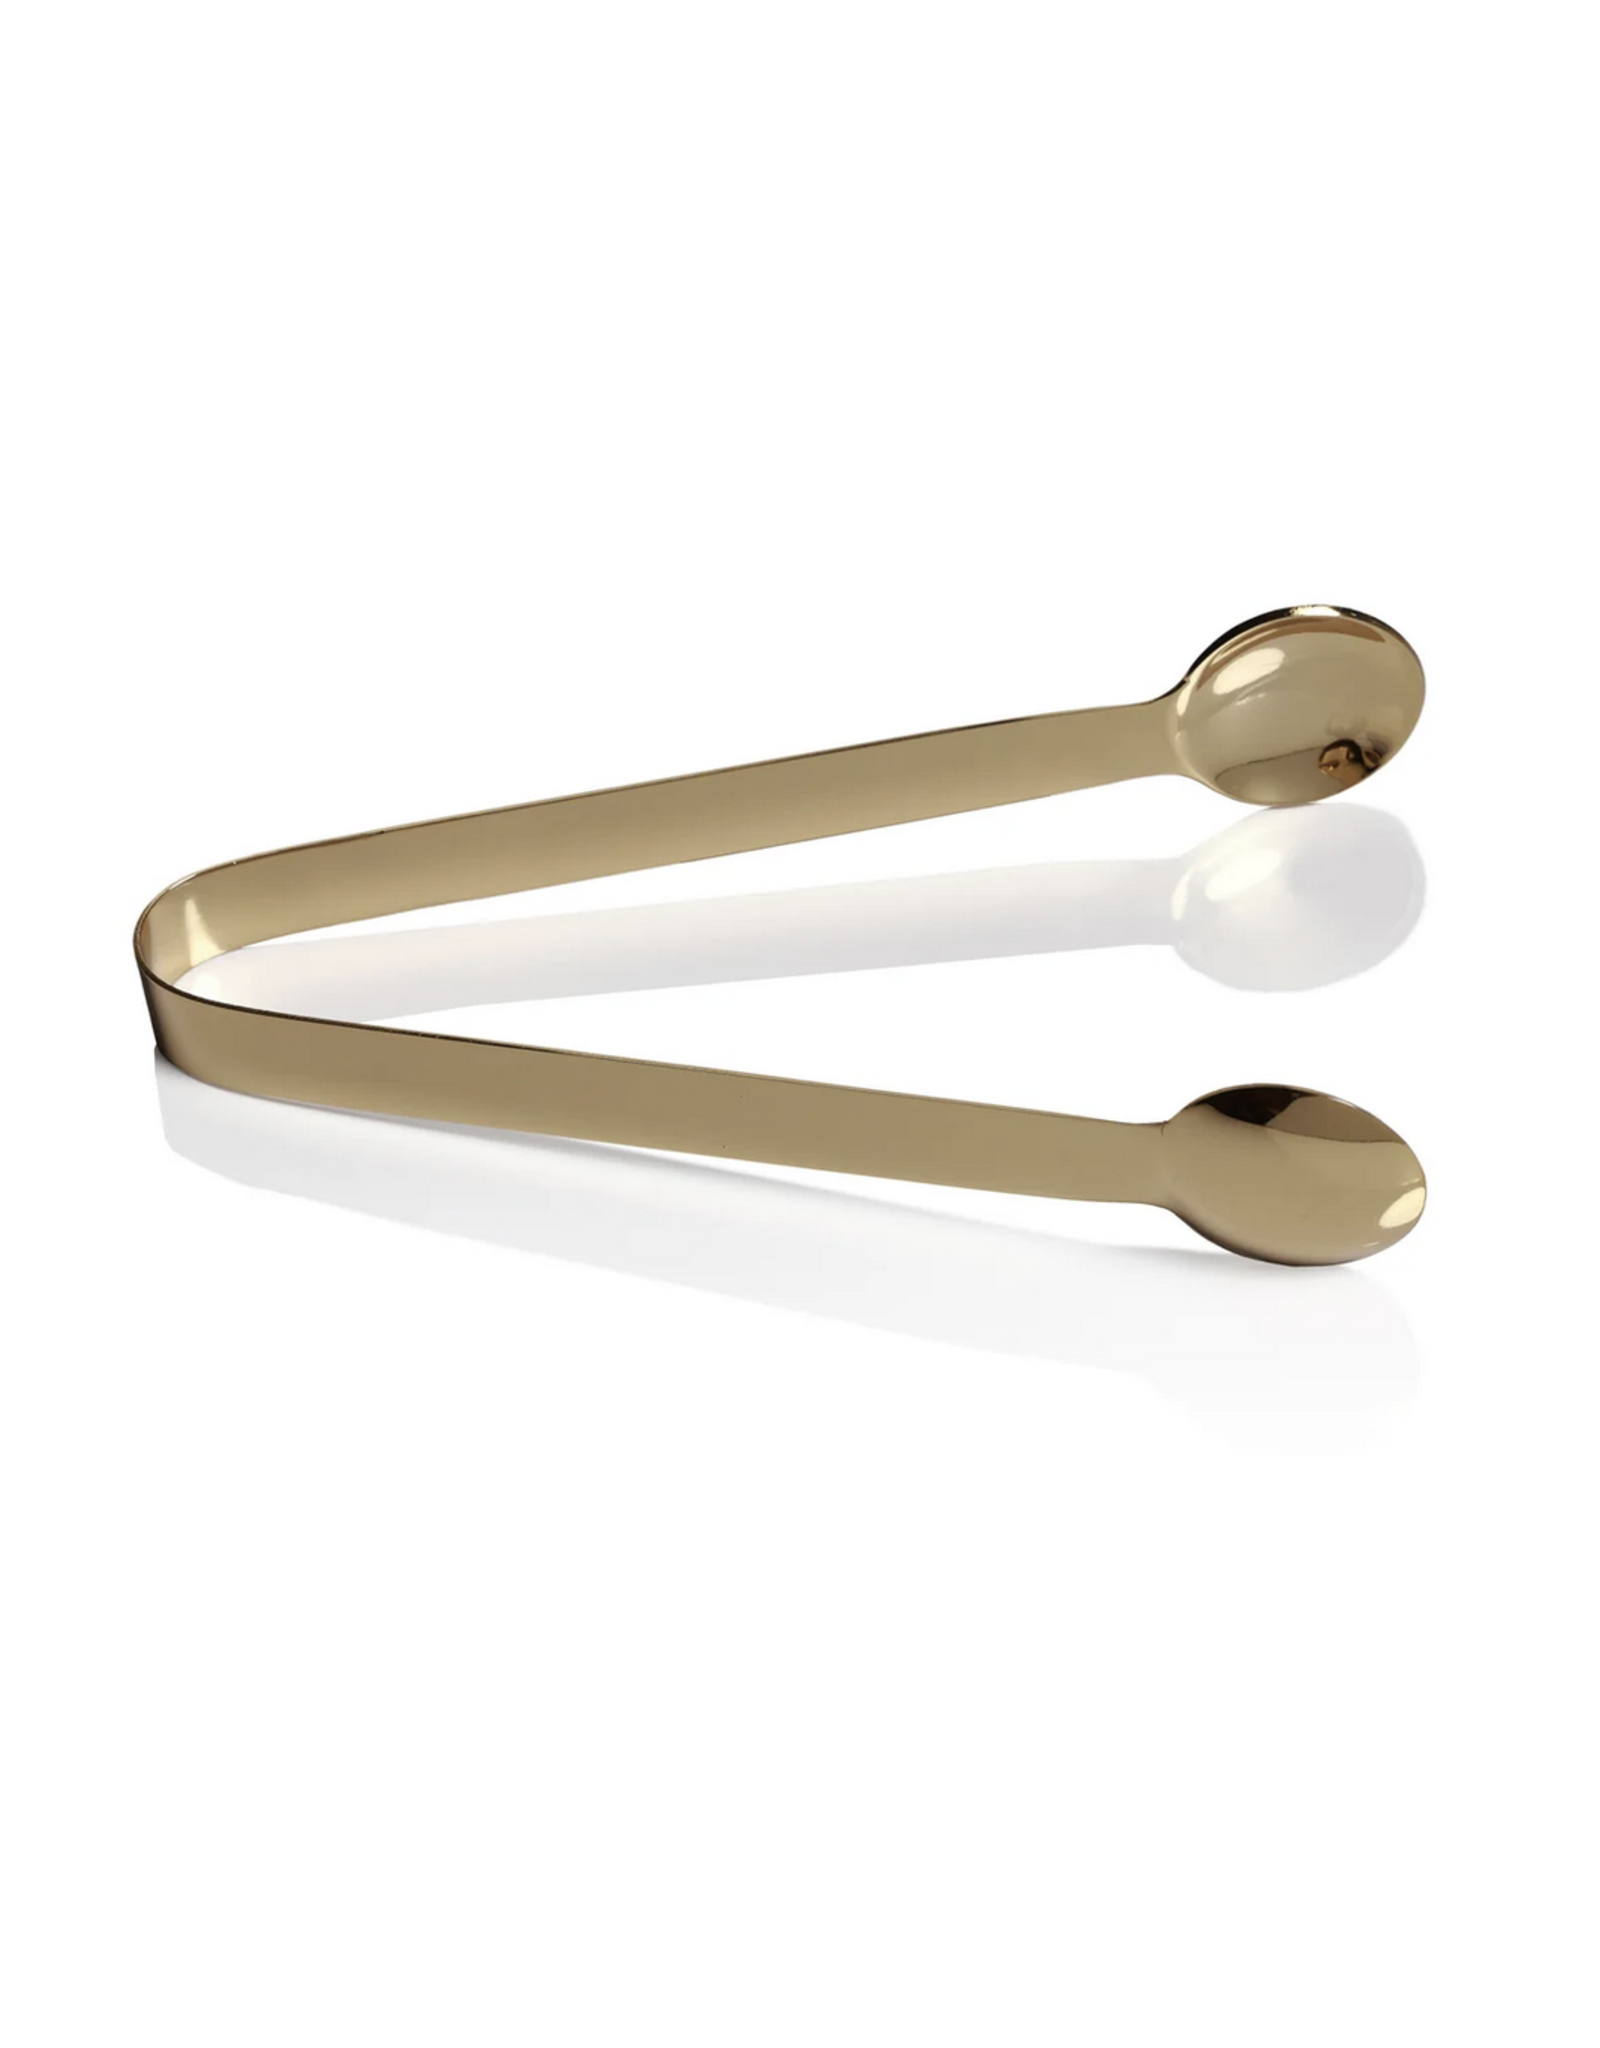 Zodax Alessia Gold Ice Tong